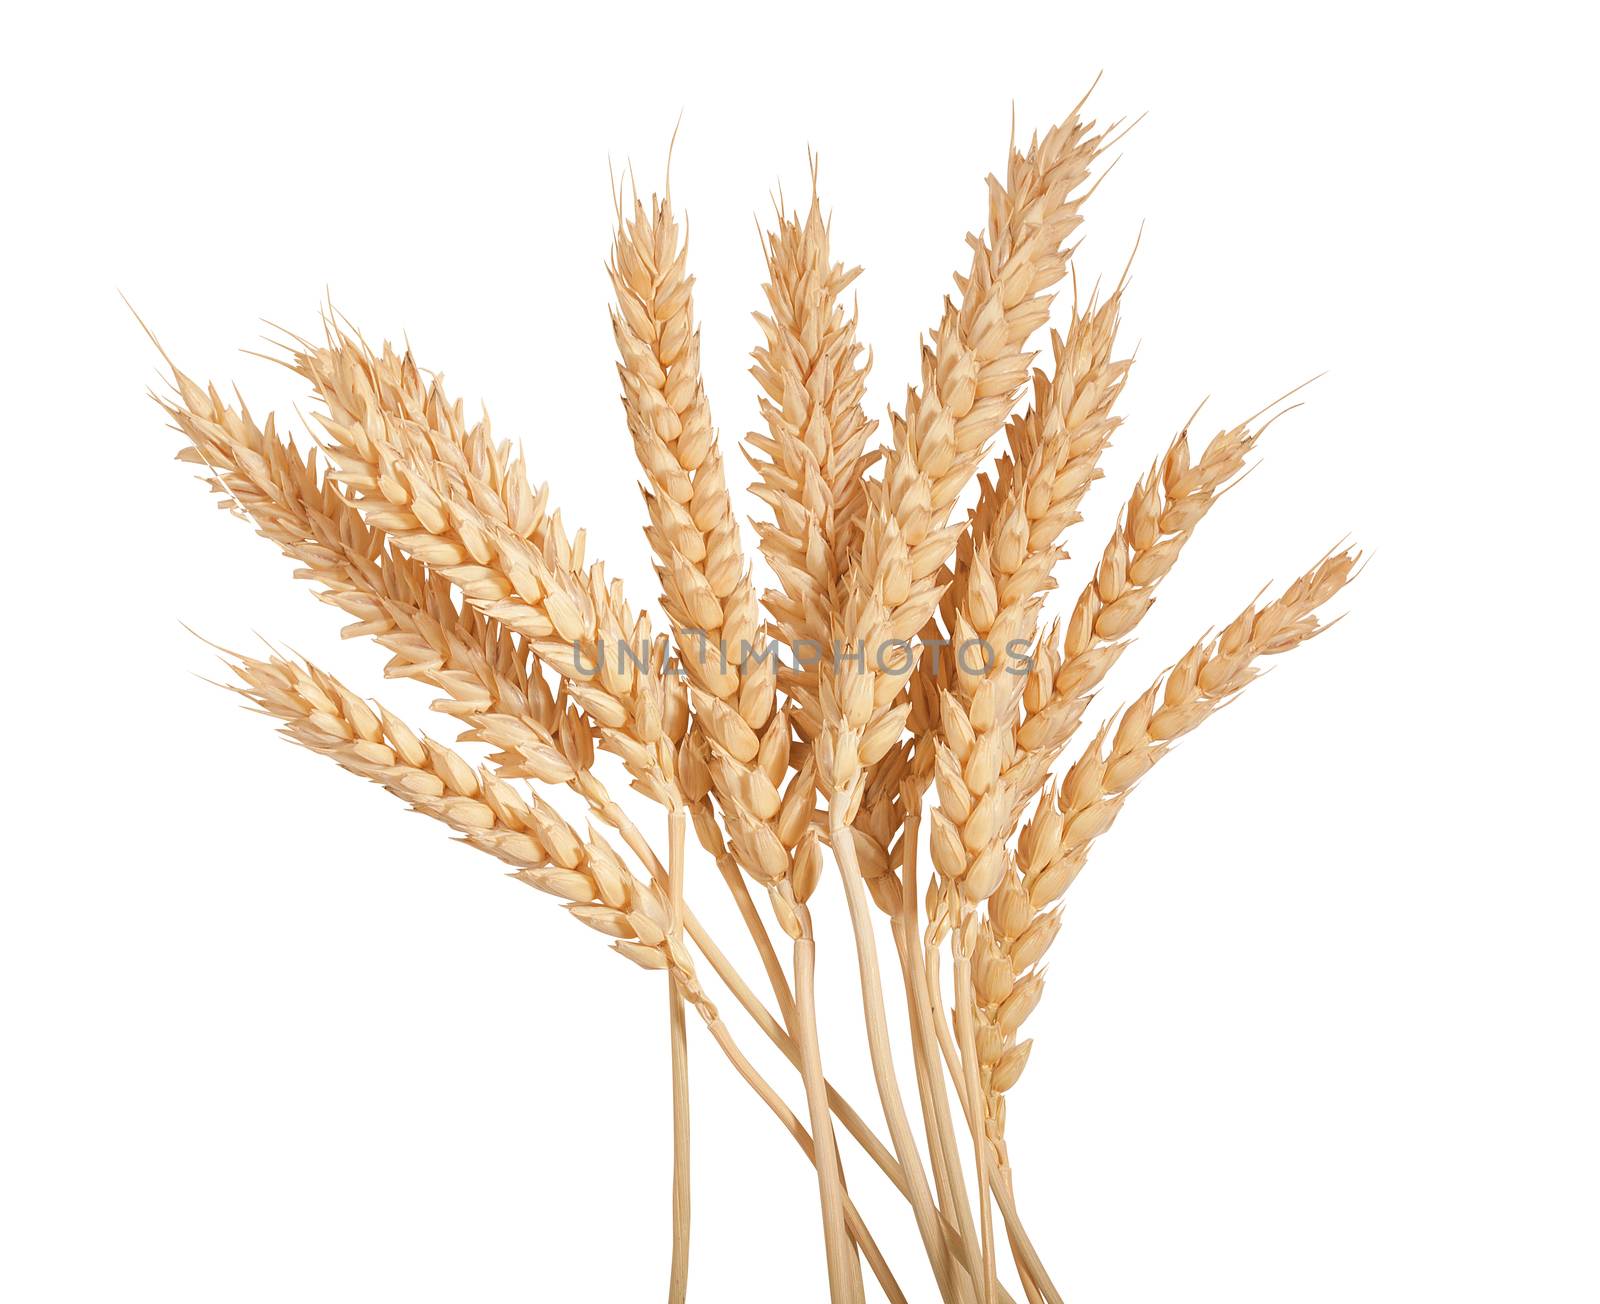 Sheaf of yellow wheat spikelets on the white background